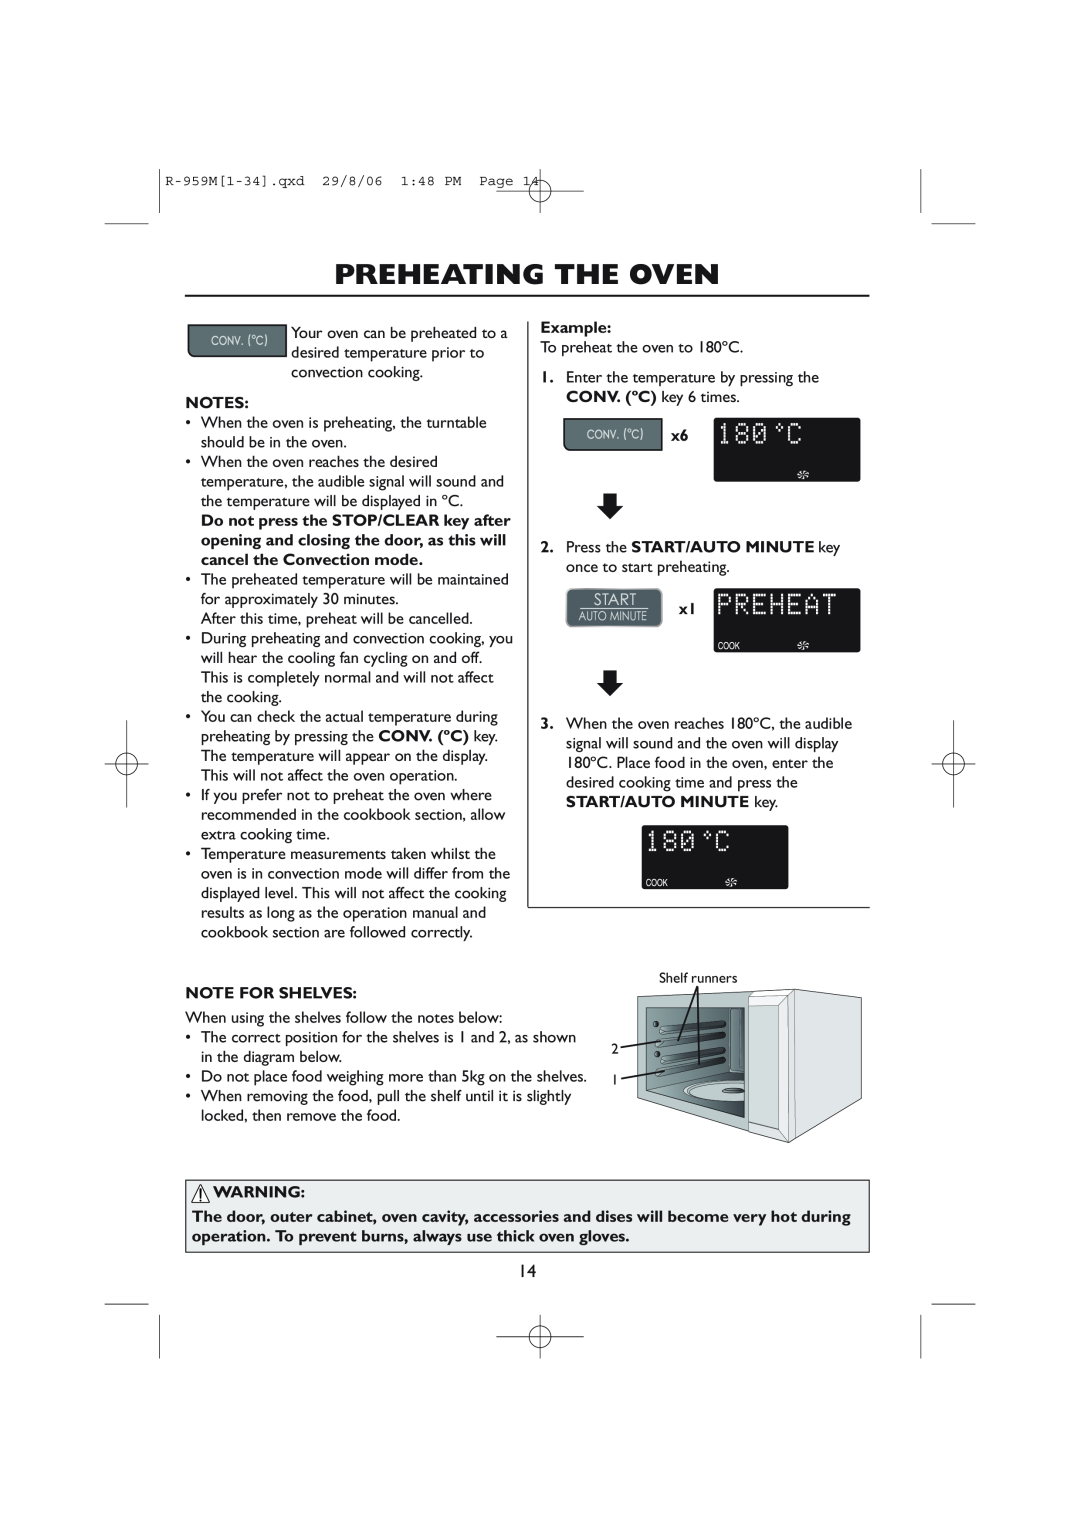 Sharp R-98STM-A Preheating The Oven, x6 2. Press the START/AUTO MINUTE key once to start preheating x1, Note For Shelves 